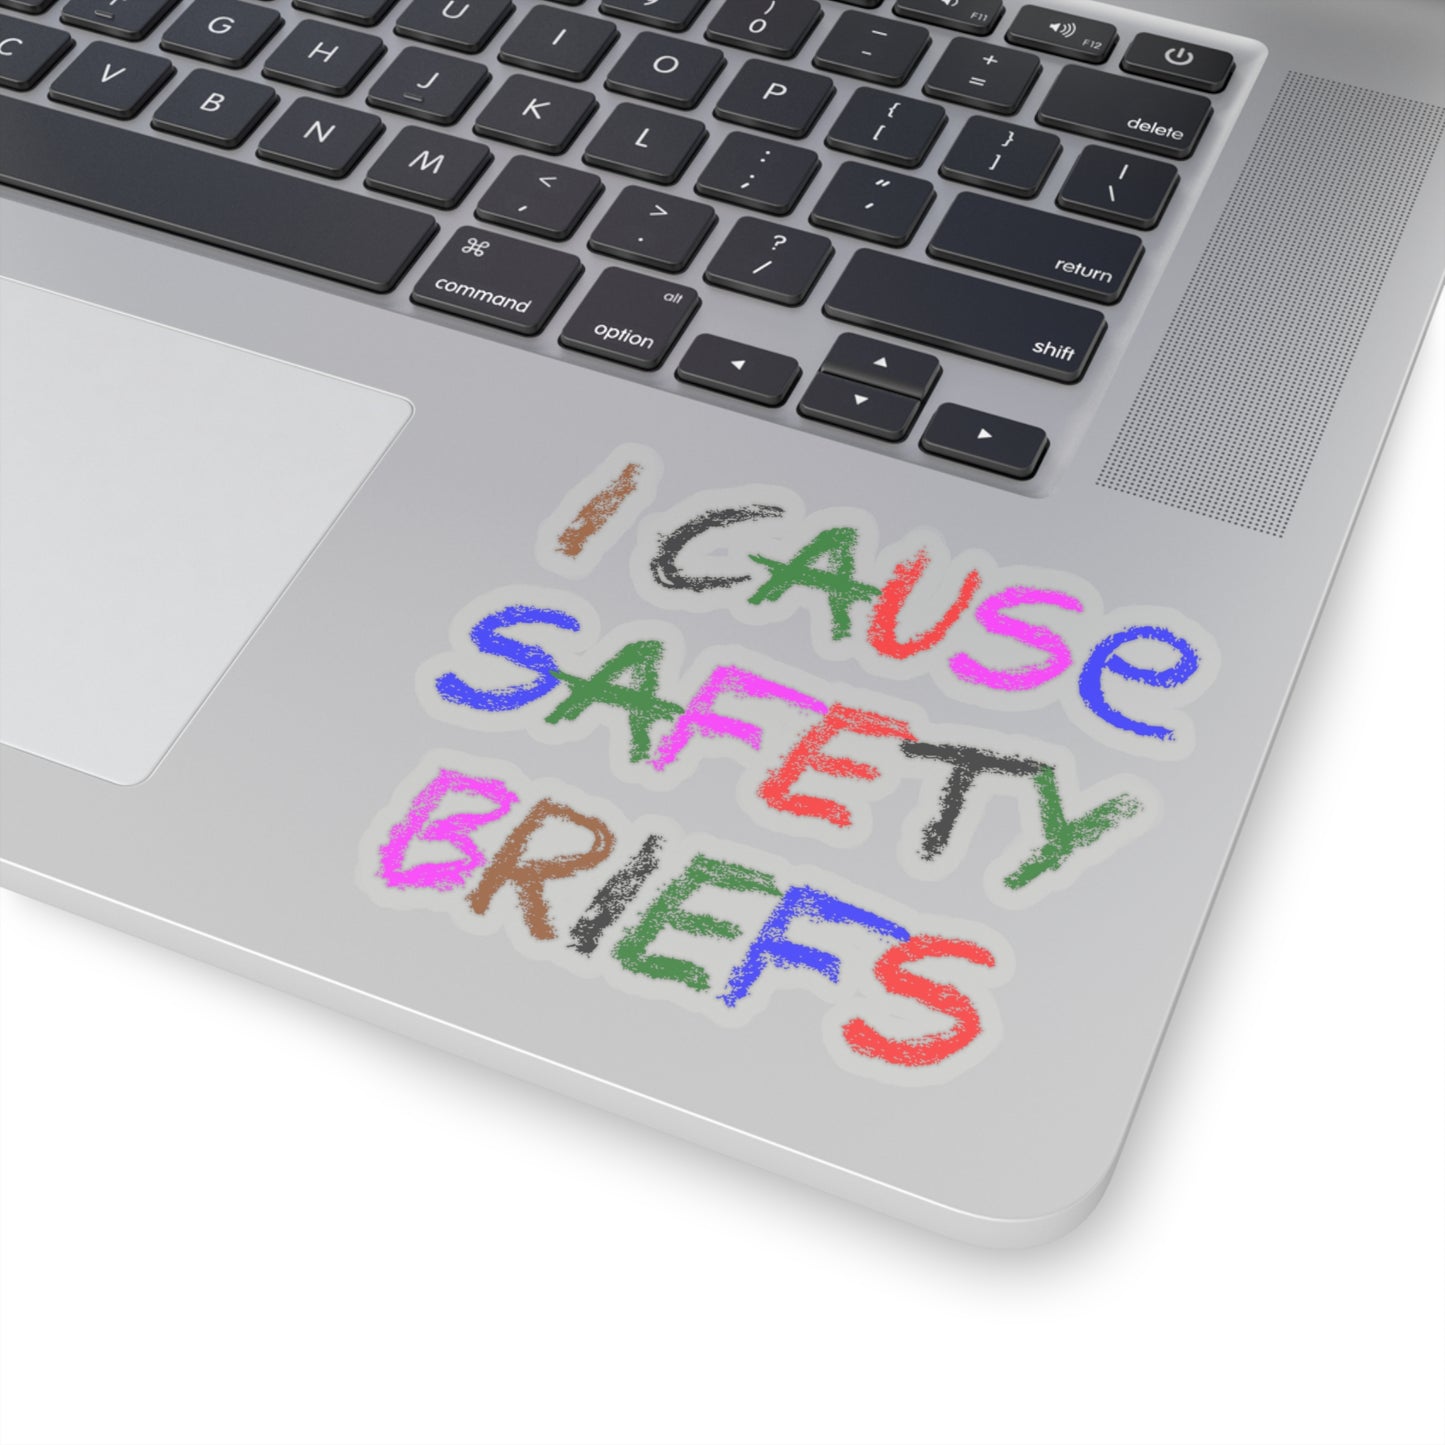 I cause safety briefs - Kiss-Cut Stickers